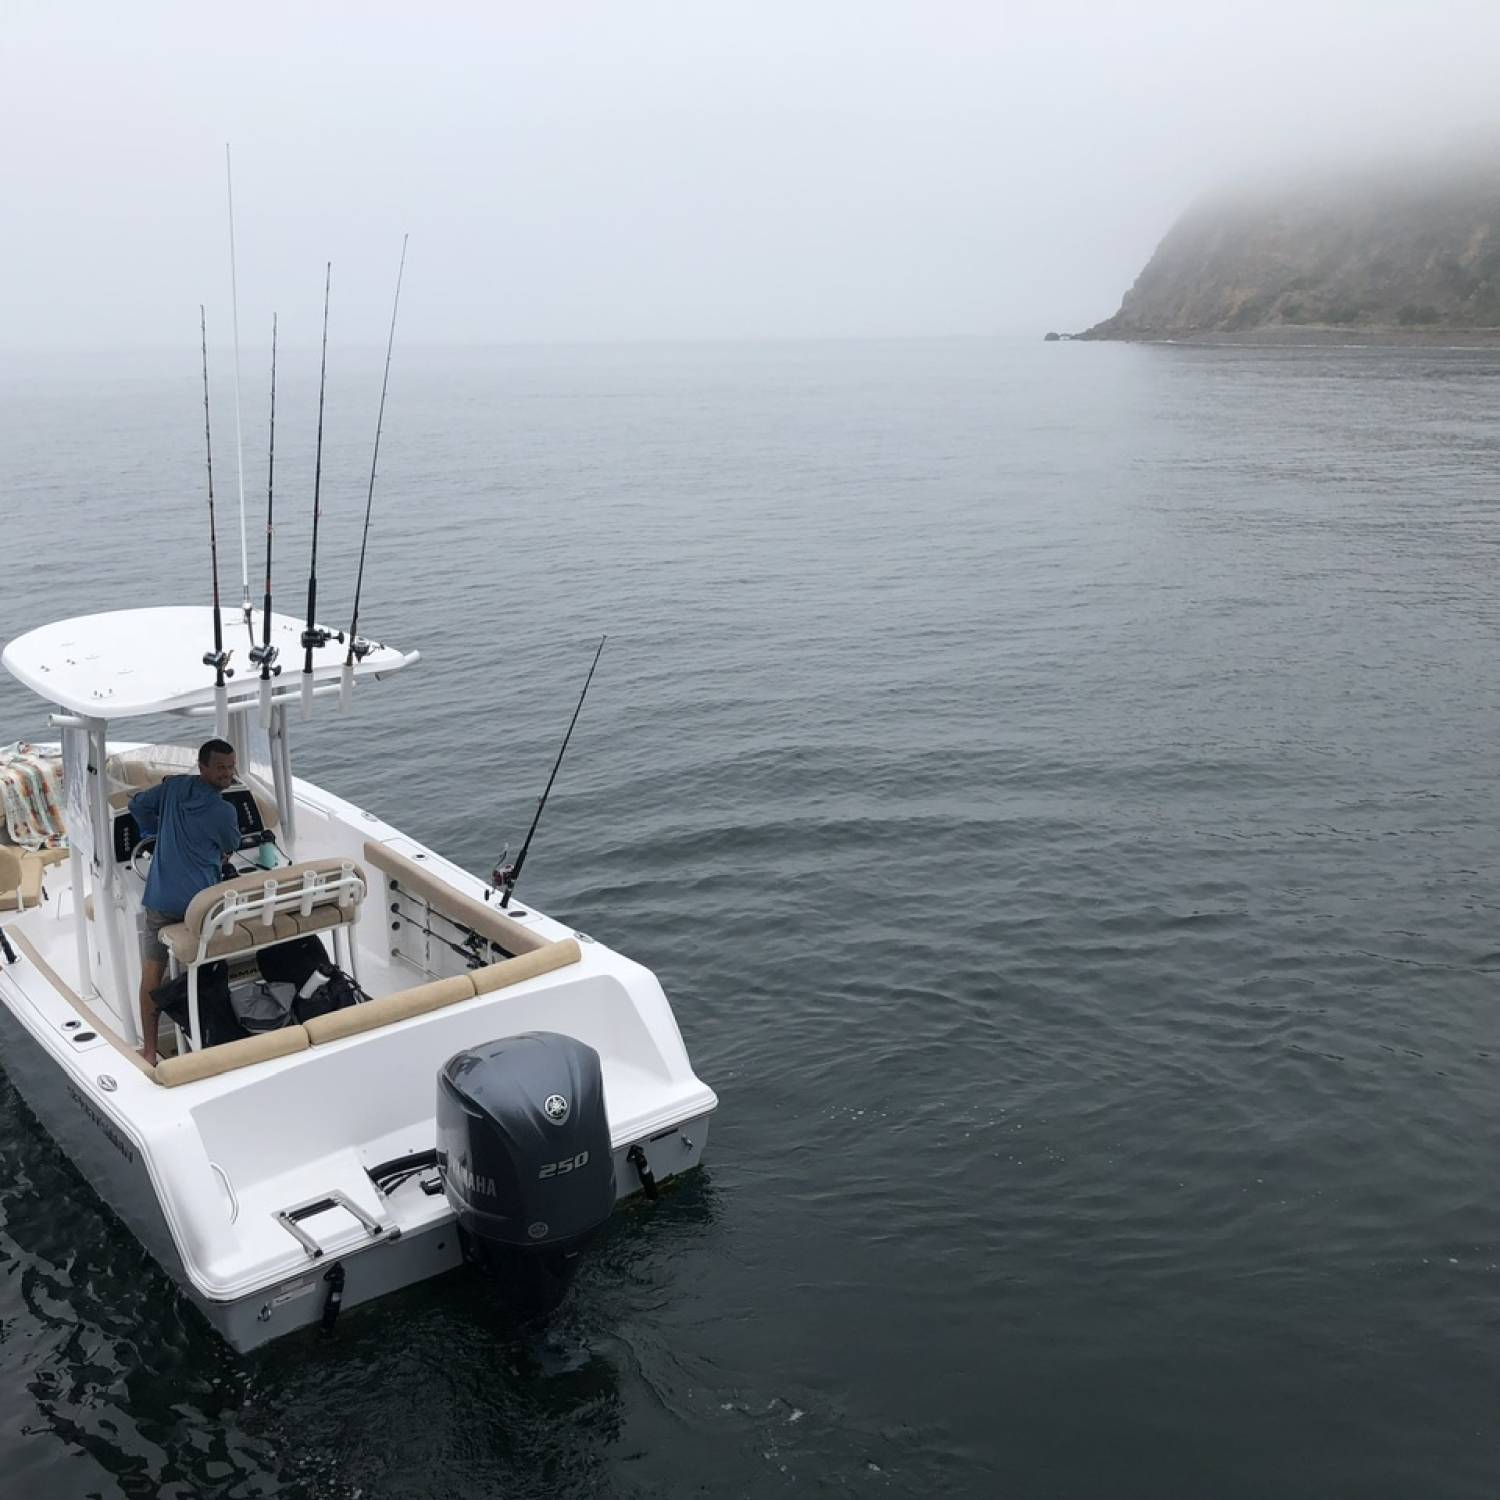 Title: Channel Islands - On board their Sportsman Heritage 231 Center Console - Location: Channel Islands. Participating in the Photo Contest #SportsmanApril2024